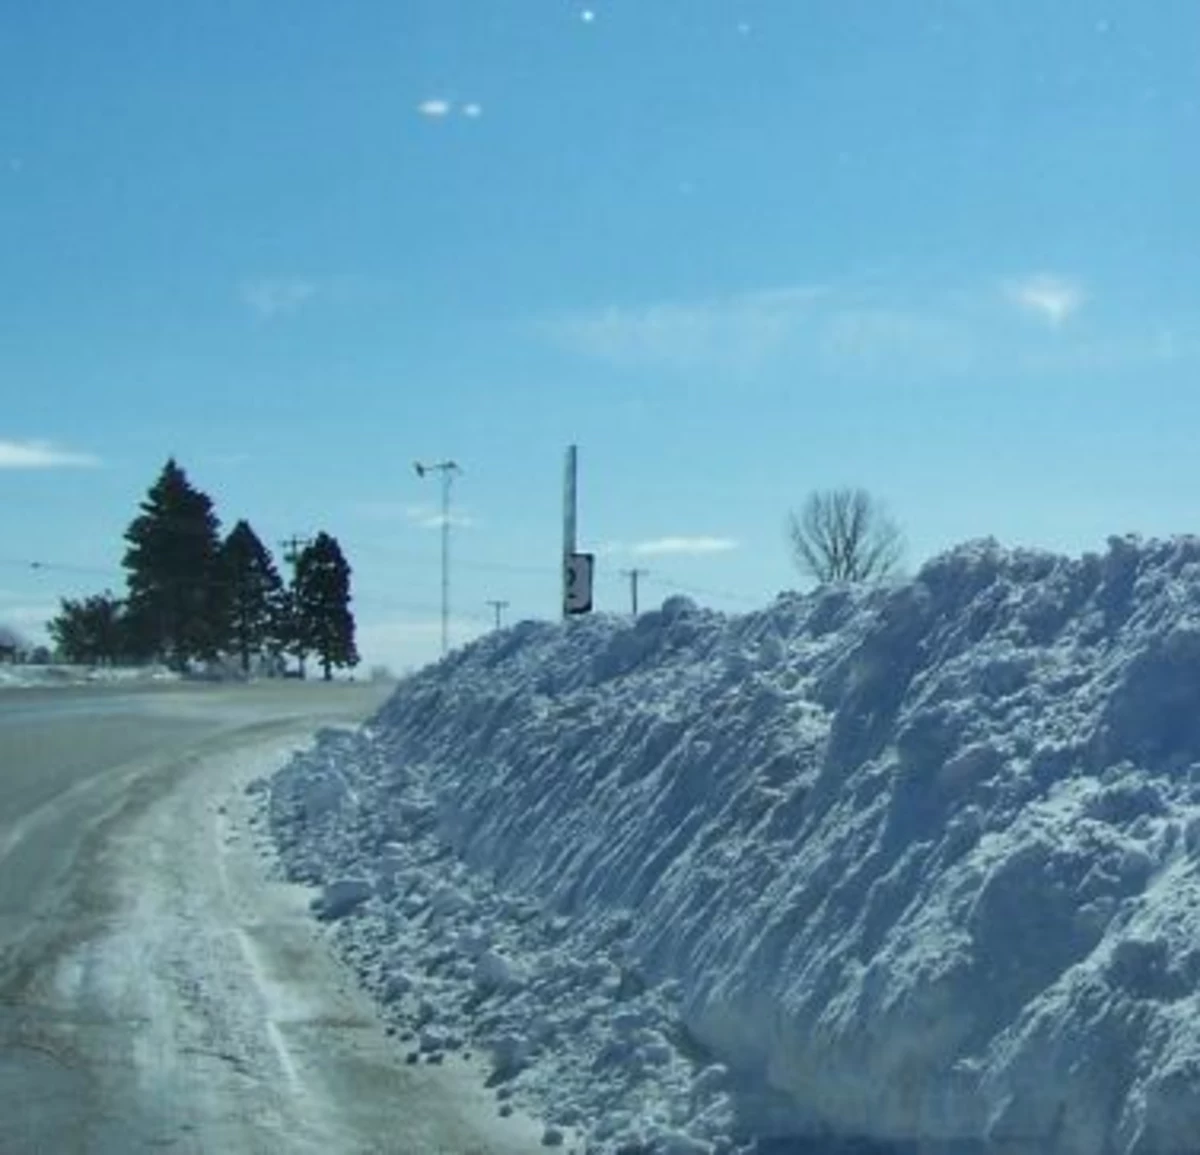 See an Incredible Photo of Tall Snow Drifts in Michigan